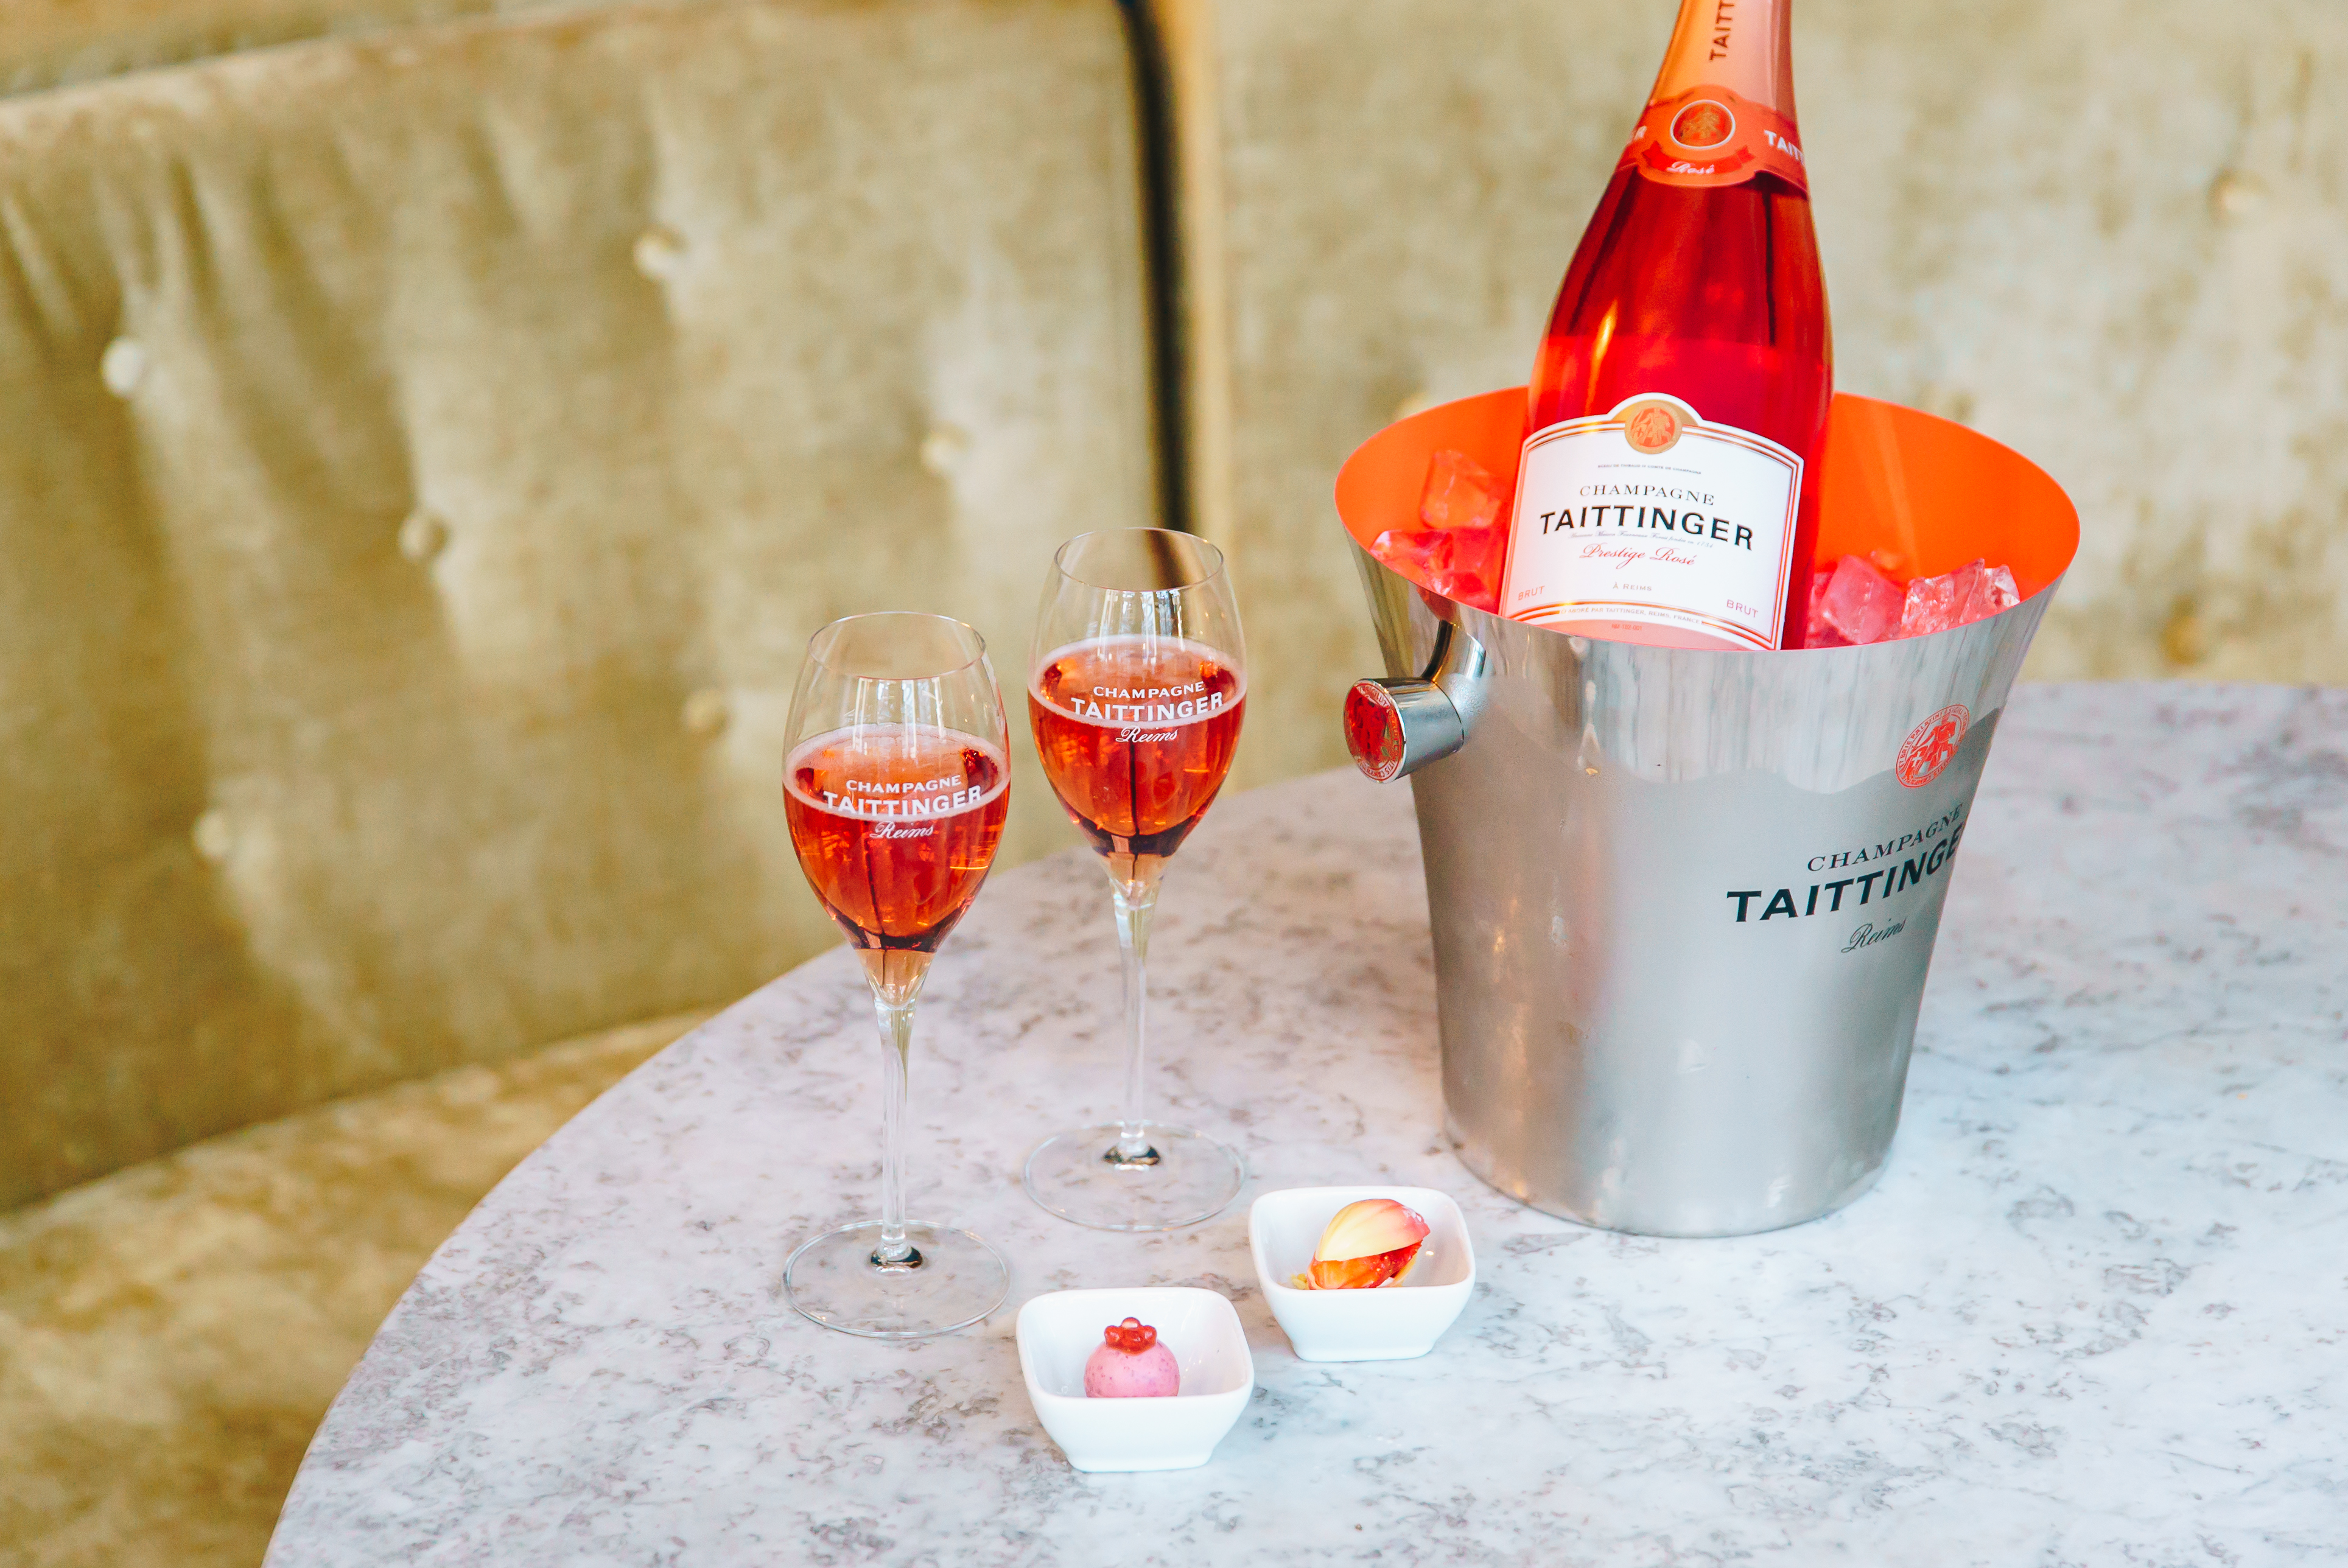 Bottle of Taittinger Prestige Rosé NV in ice bucket with canapes